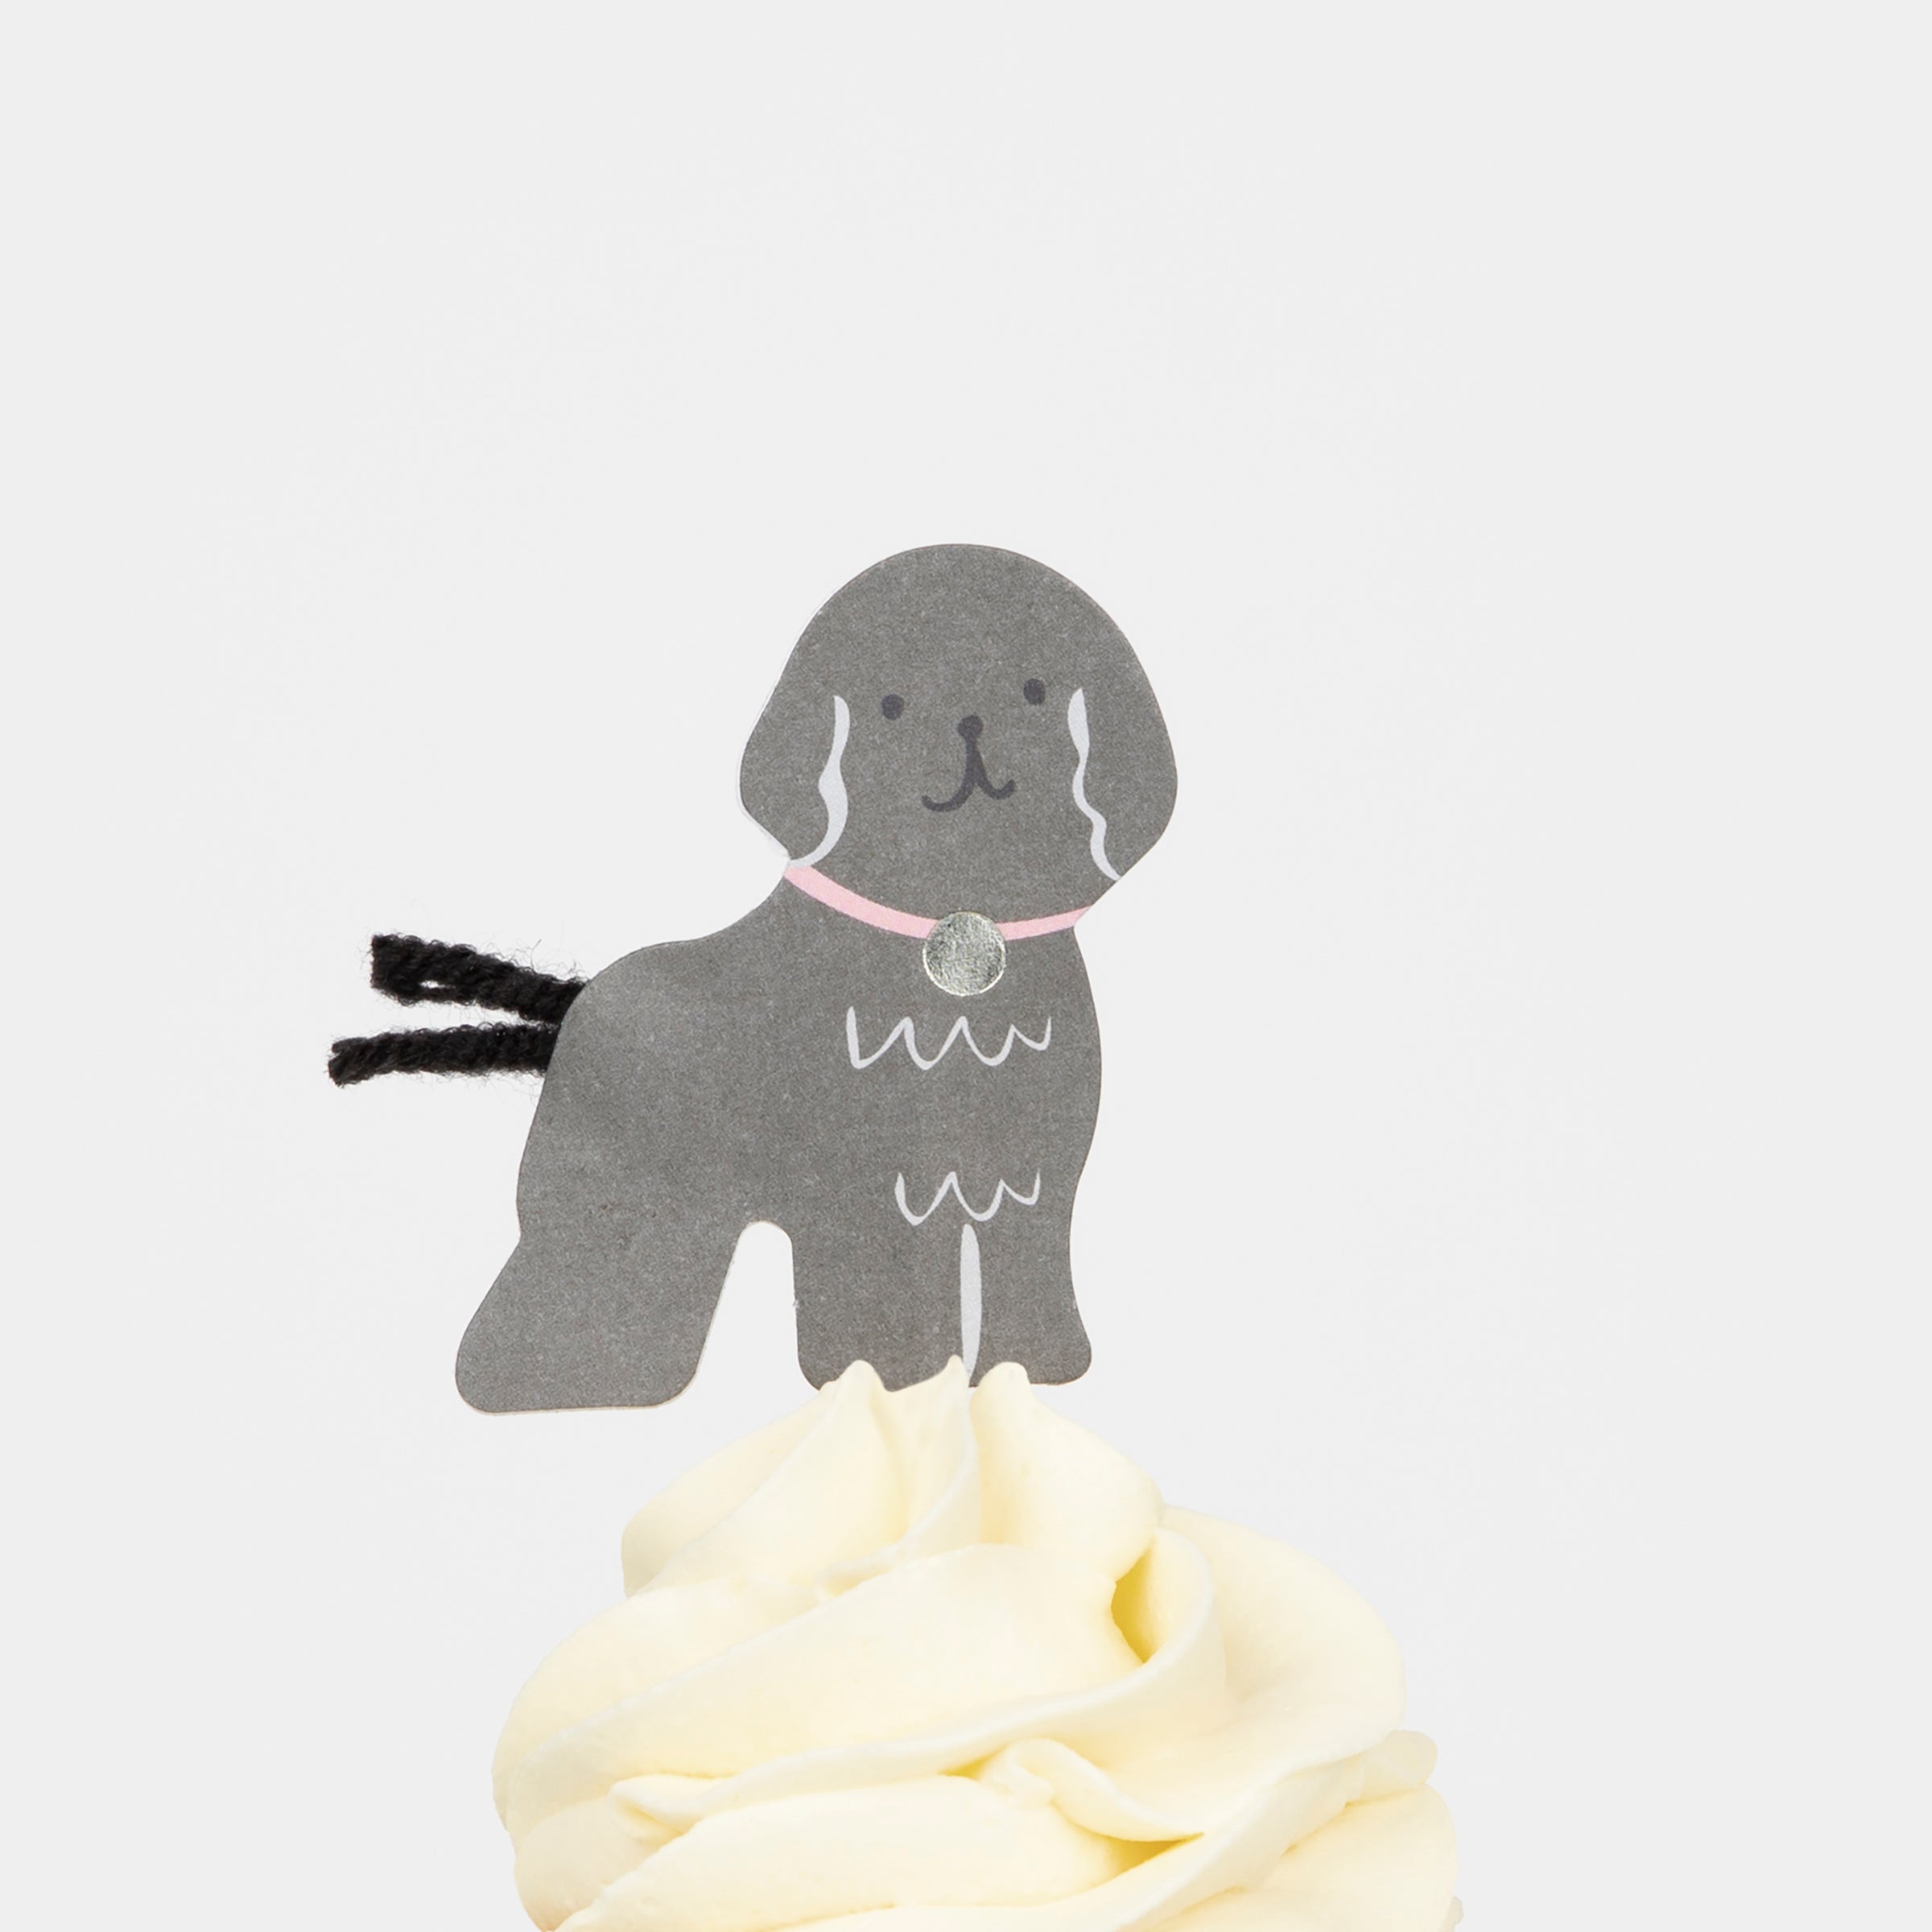 Our special cupcake toppers and cupcake cases are perfect to create birthday cupcakes for a dog birthday party.